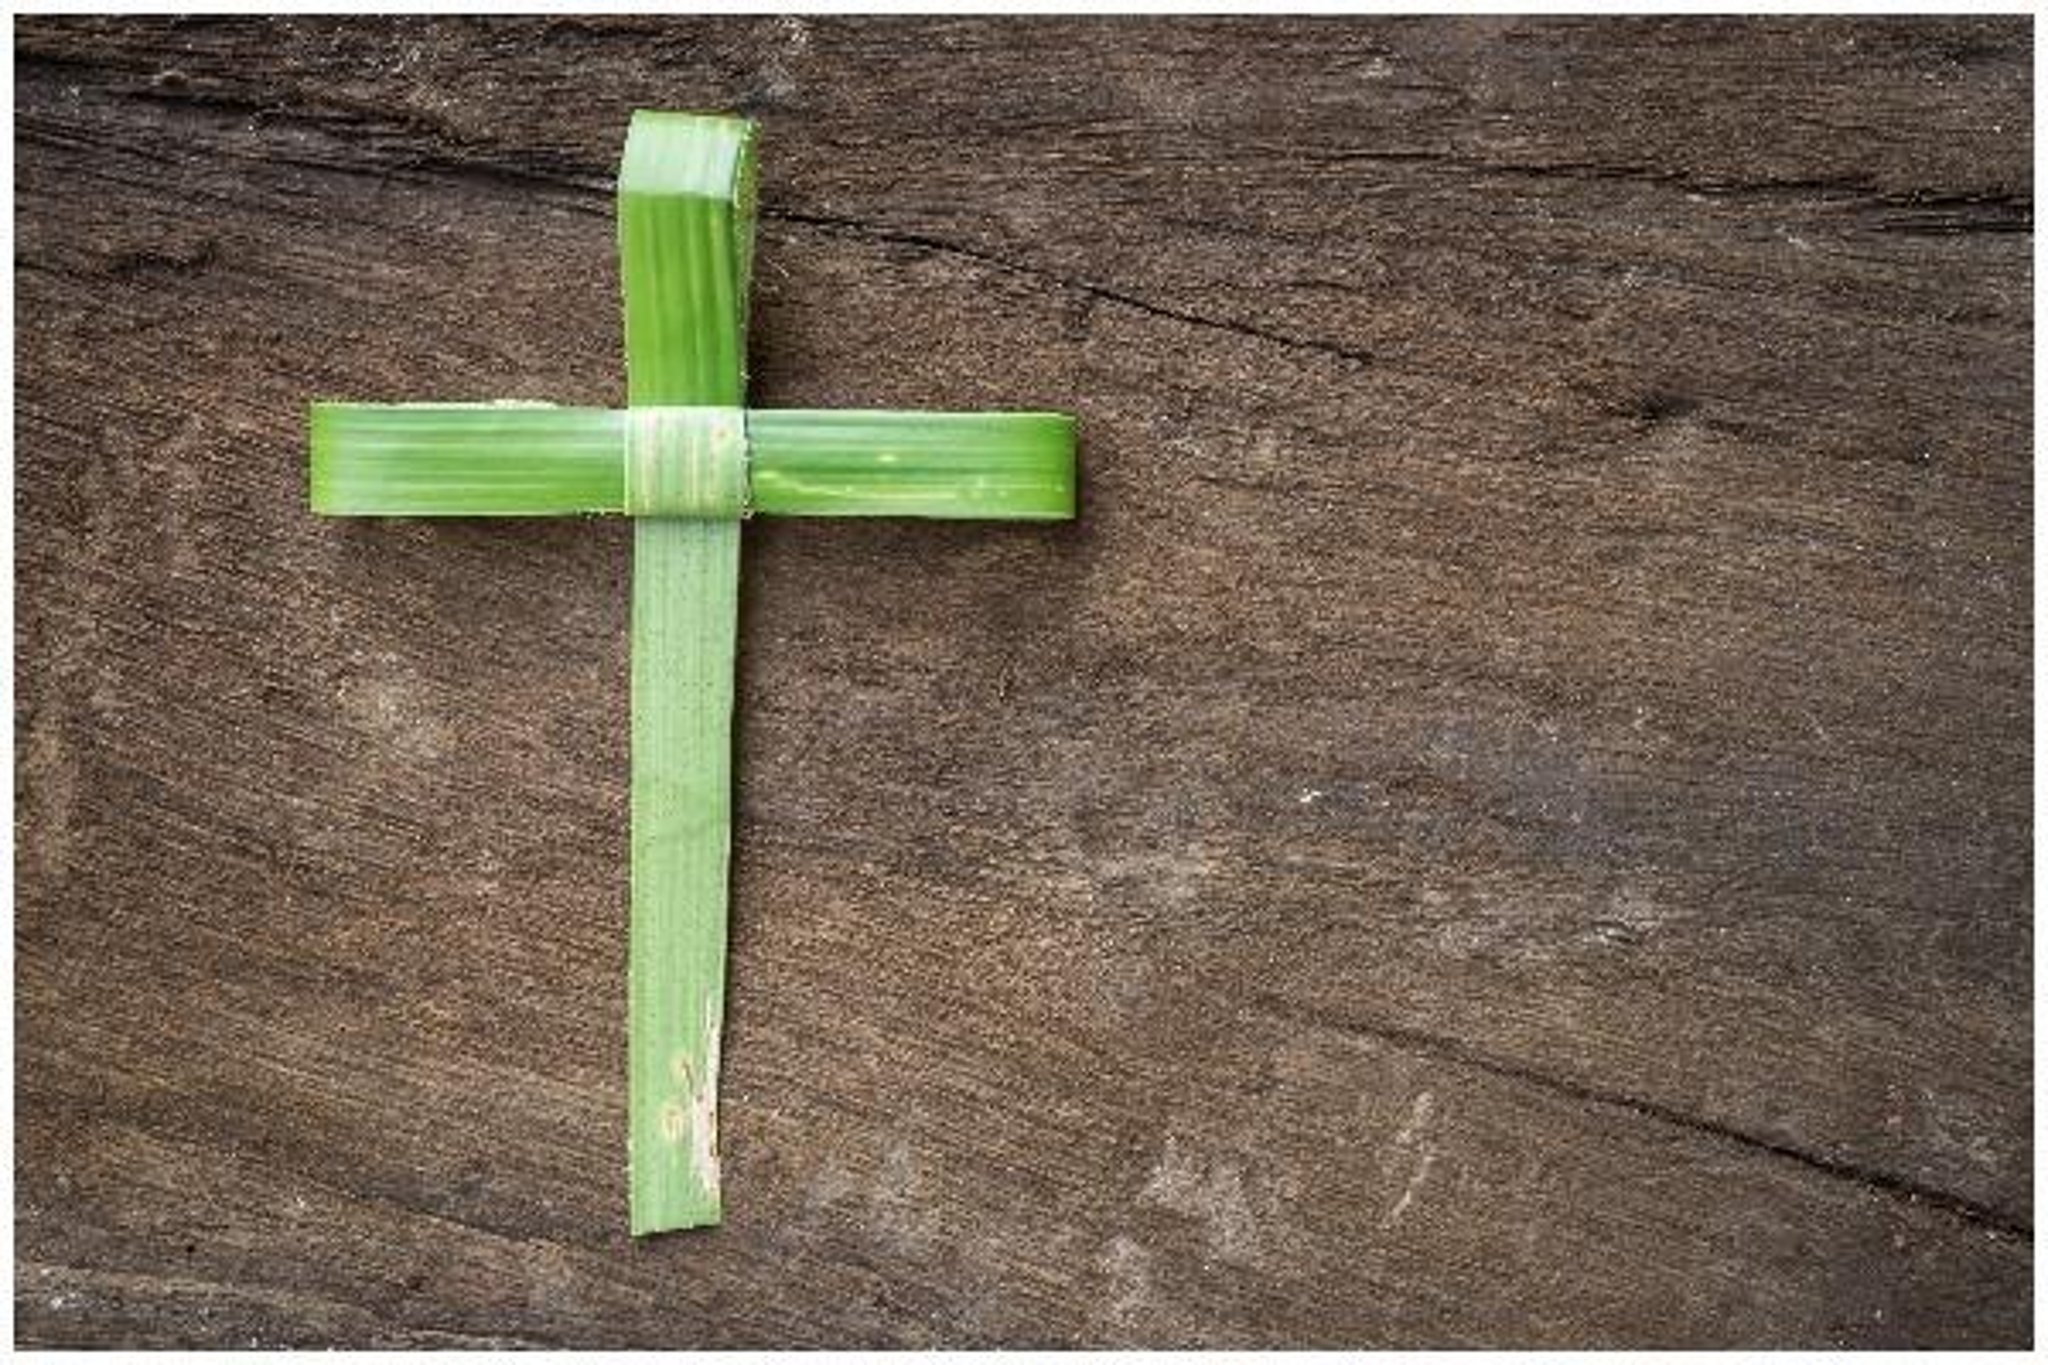 Palm Sunday 2020 When Is The Christian Feast Marking Start Of The Holy Week Story Behind It And Songs And Activities For Kids The Scotsman